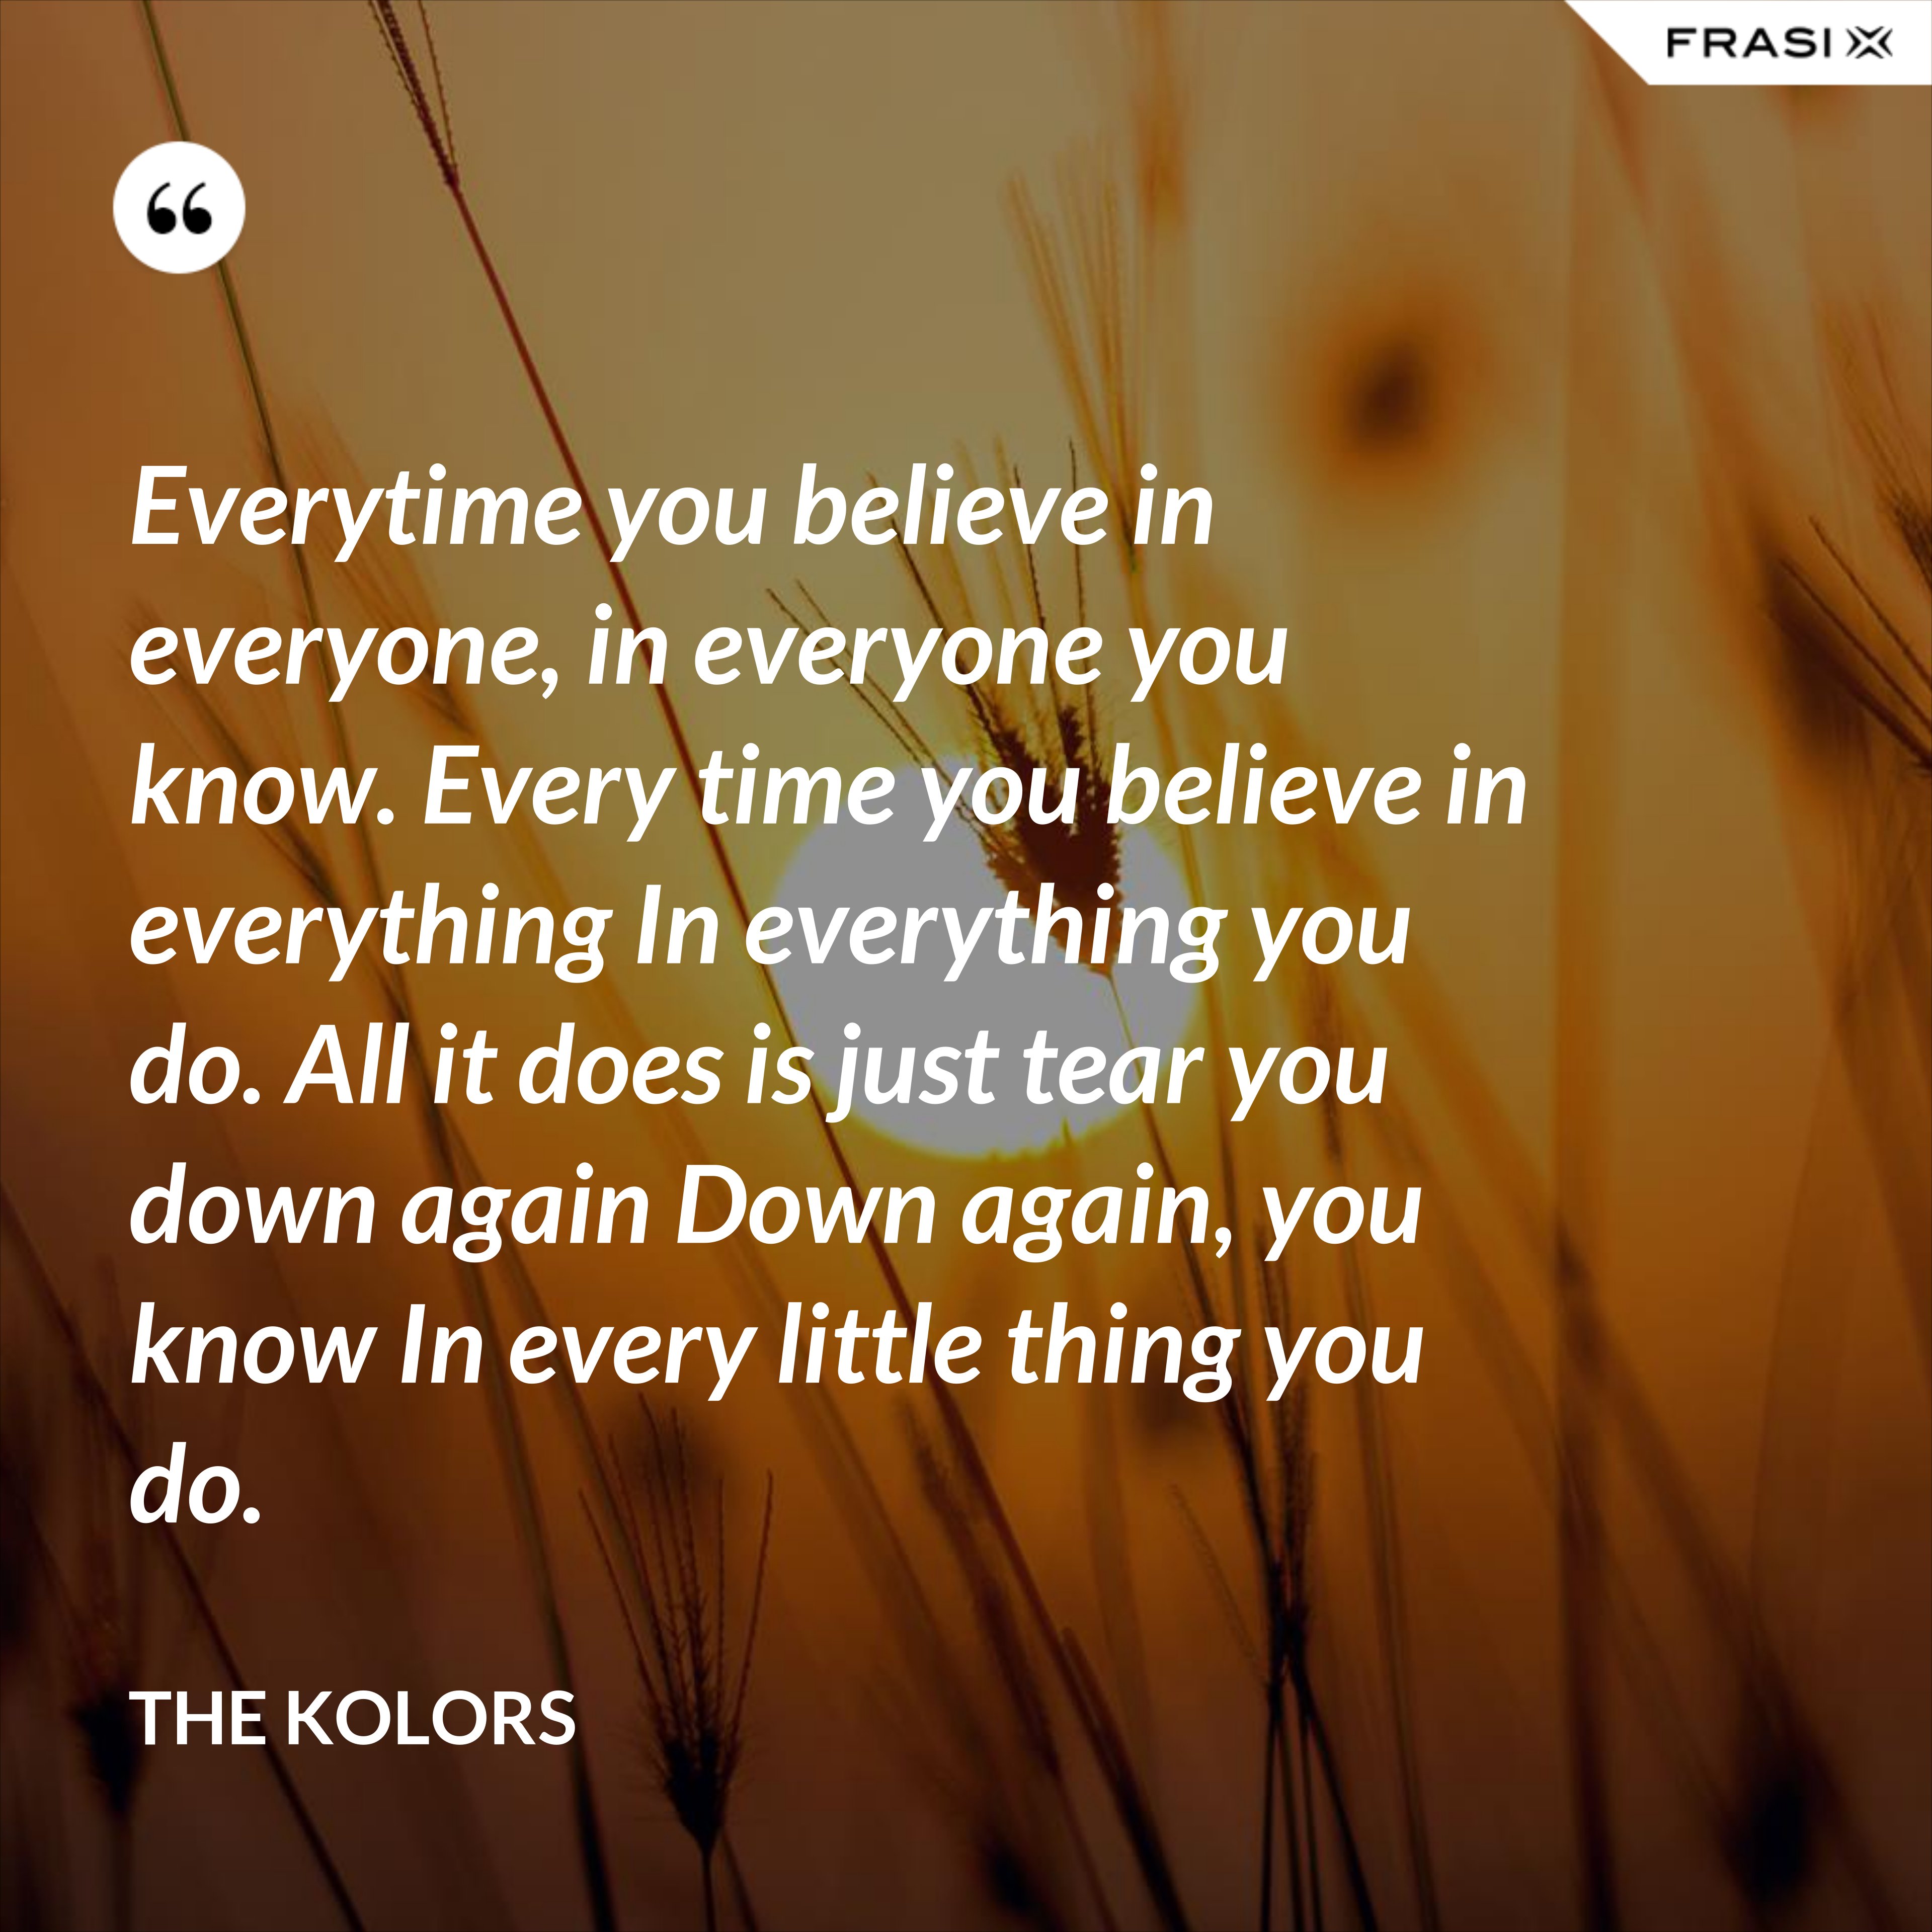 Everytime you believe in everyone, in everyone you know. Every time you believe in everything In everything you do. All it does is just tear you down again Down again, you know In every little thing you do. - The Kolors